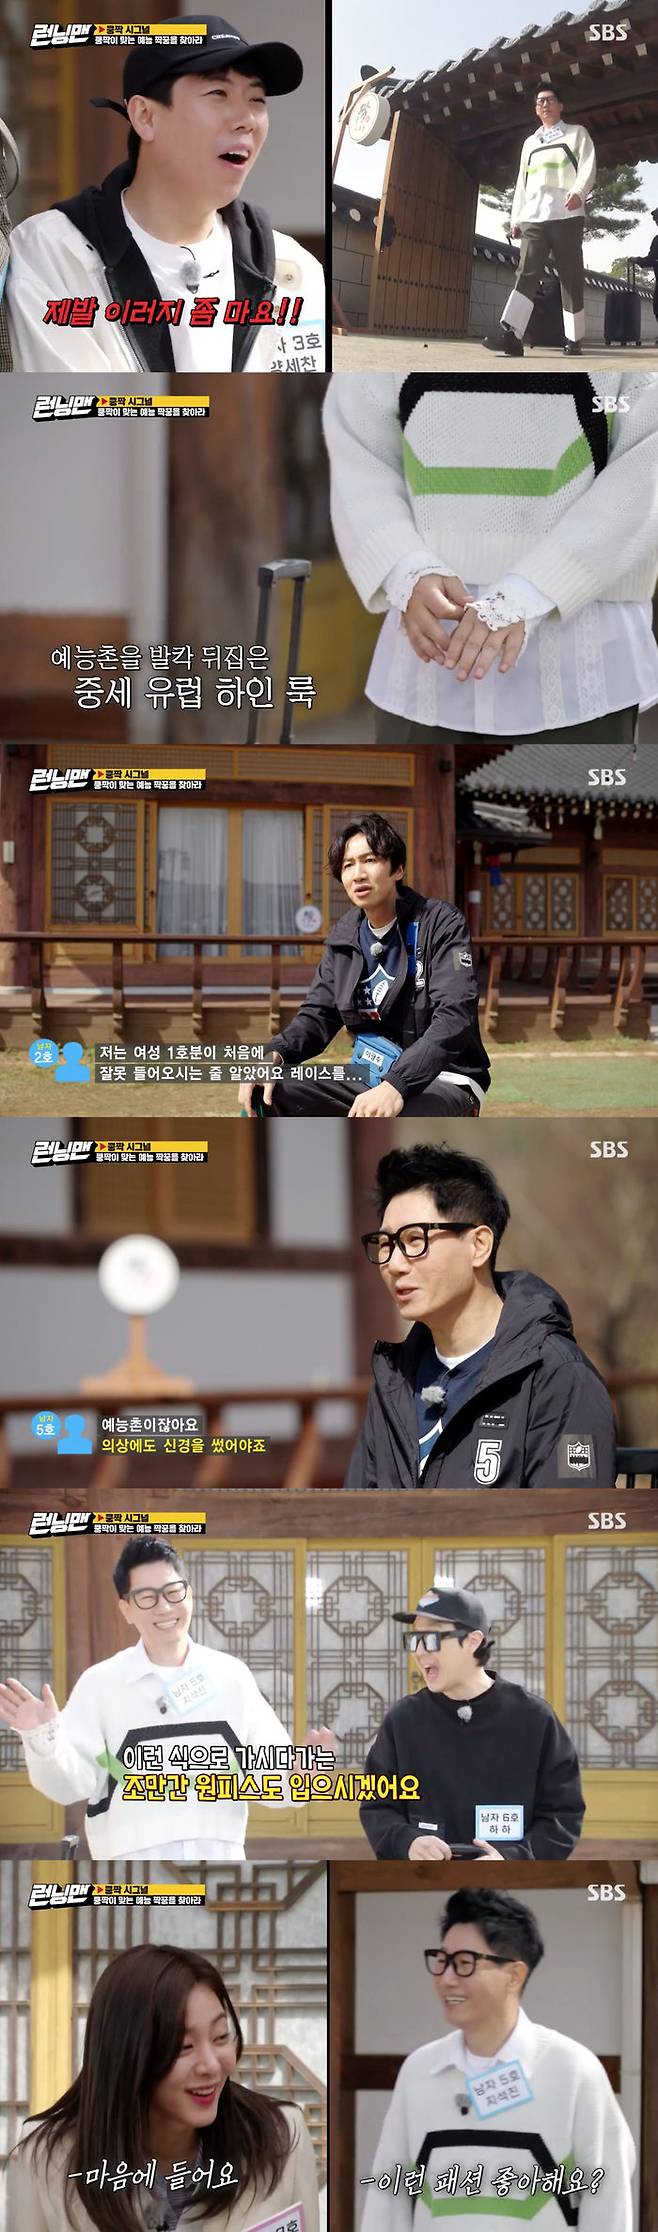 Ji Suk-jin has focused attention with his extraordinary Fashion sense.On SBS Running Man broadcasted on the 18th, Kungmak Signal - Entertainment Village Race was held.On the show, the participants of Cuckold each showed charm and checked each other, and at this time the scene was saddened by the appearance of Cuckold No. 5 Ji Suk-jin.Cuckold No. 3 Yang Se-chan said to Cuckold No. 5 Please do not do this.Why is that? And Cuckold 2 Lee Kwang-soo said, Why was Cuckold dressed? Why are you dressed in womens clothes?The Cuckold 5 Ji Suk-jin surprised everyone by appearing in a look reminiscent of a Middle Ages Europe servant, with a race sleeve and crop top knit on the bottom of overly folded pants.The clothes are pretty, but Race was too much, I think I appealed to take my gaze, but it is a mistake, said Cuckold 2 Lee Kwang-soo.However, Cuckold 5 Ji Suk-jin said, I think I am the best in entertainment, although I am ahead of Fashion.Other participants should have been careful about Fashion. Is it also a sin to be interested in Fashion? Afterwards, the participants of Cuckold began to point out and give a lecture on the costume of Cuckold 5 saying, I will wear a dress soon.In addition, Cuckold 6 Haha said, It is the beginning of the day, and when I walked together, I said, Oh, this is a bit embarrassing.